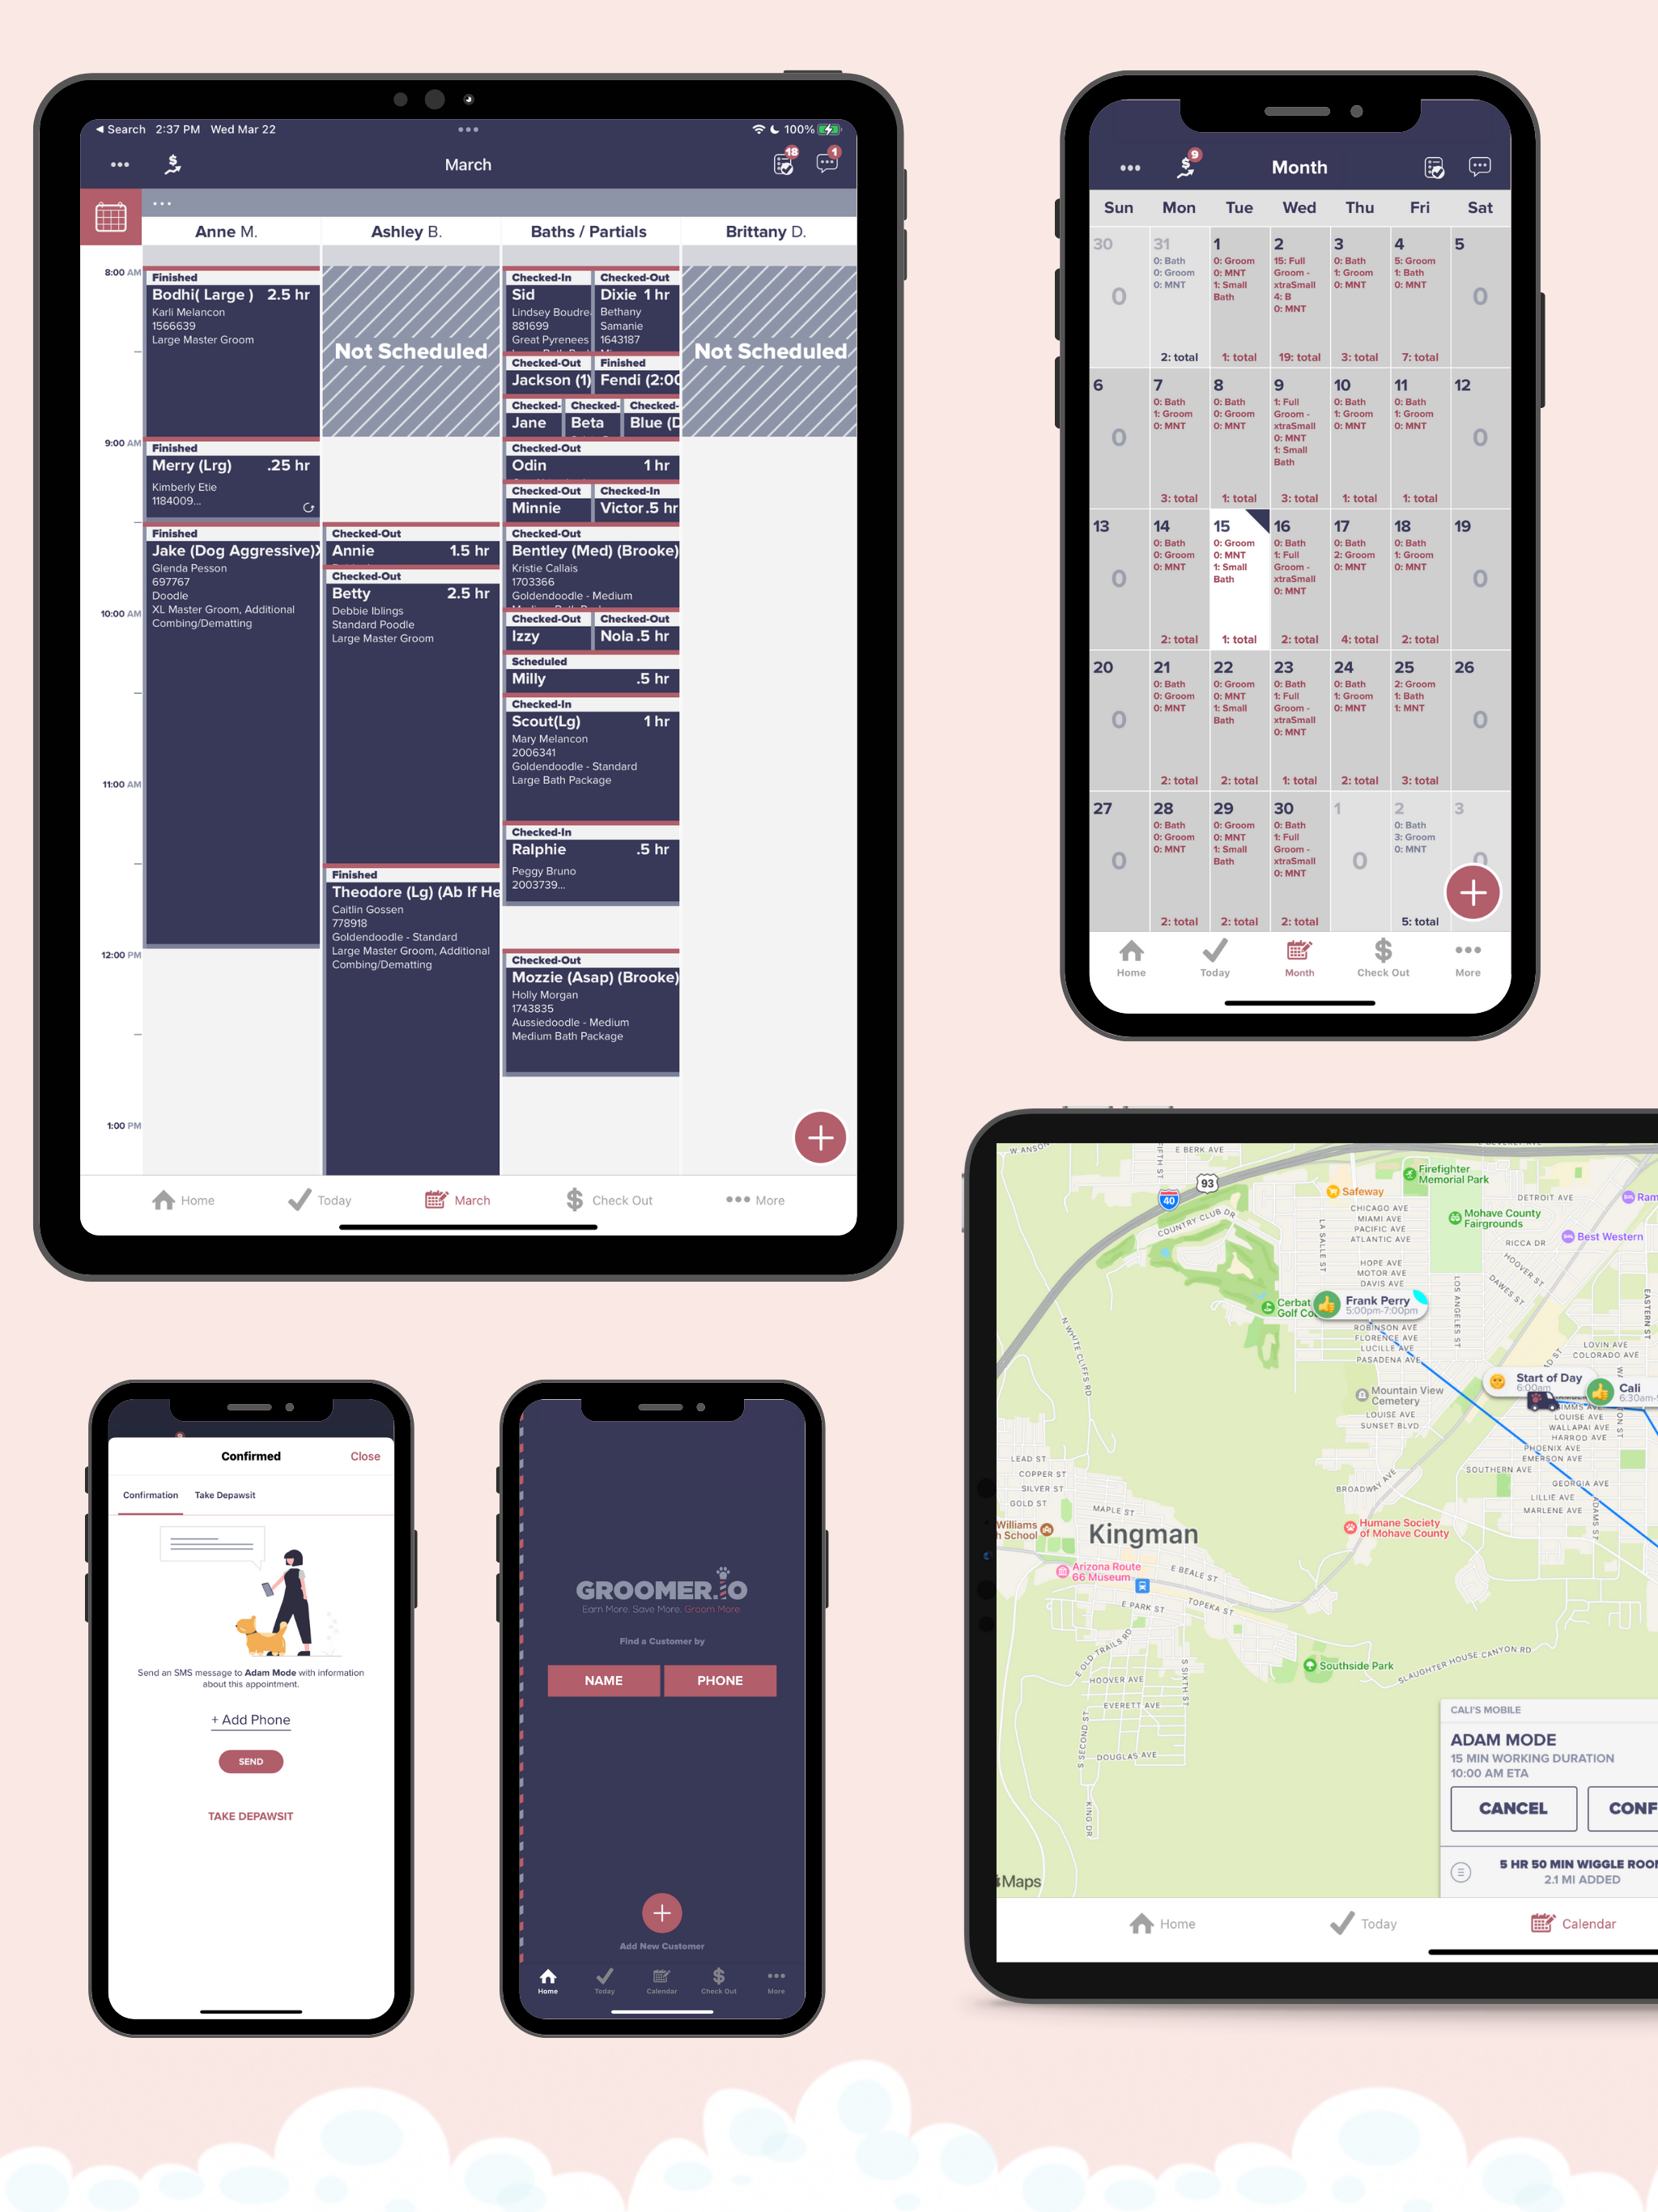 See the various calendar views on both mobile and tablet. As well as the smart routing view (bottom right). Confirm appointments at the click of a button (bottom left).